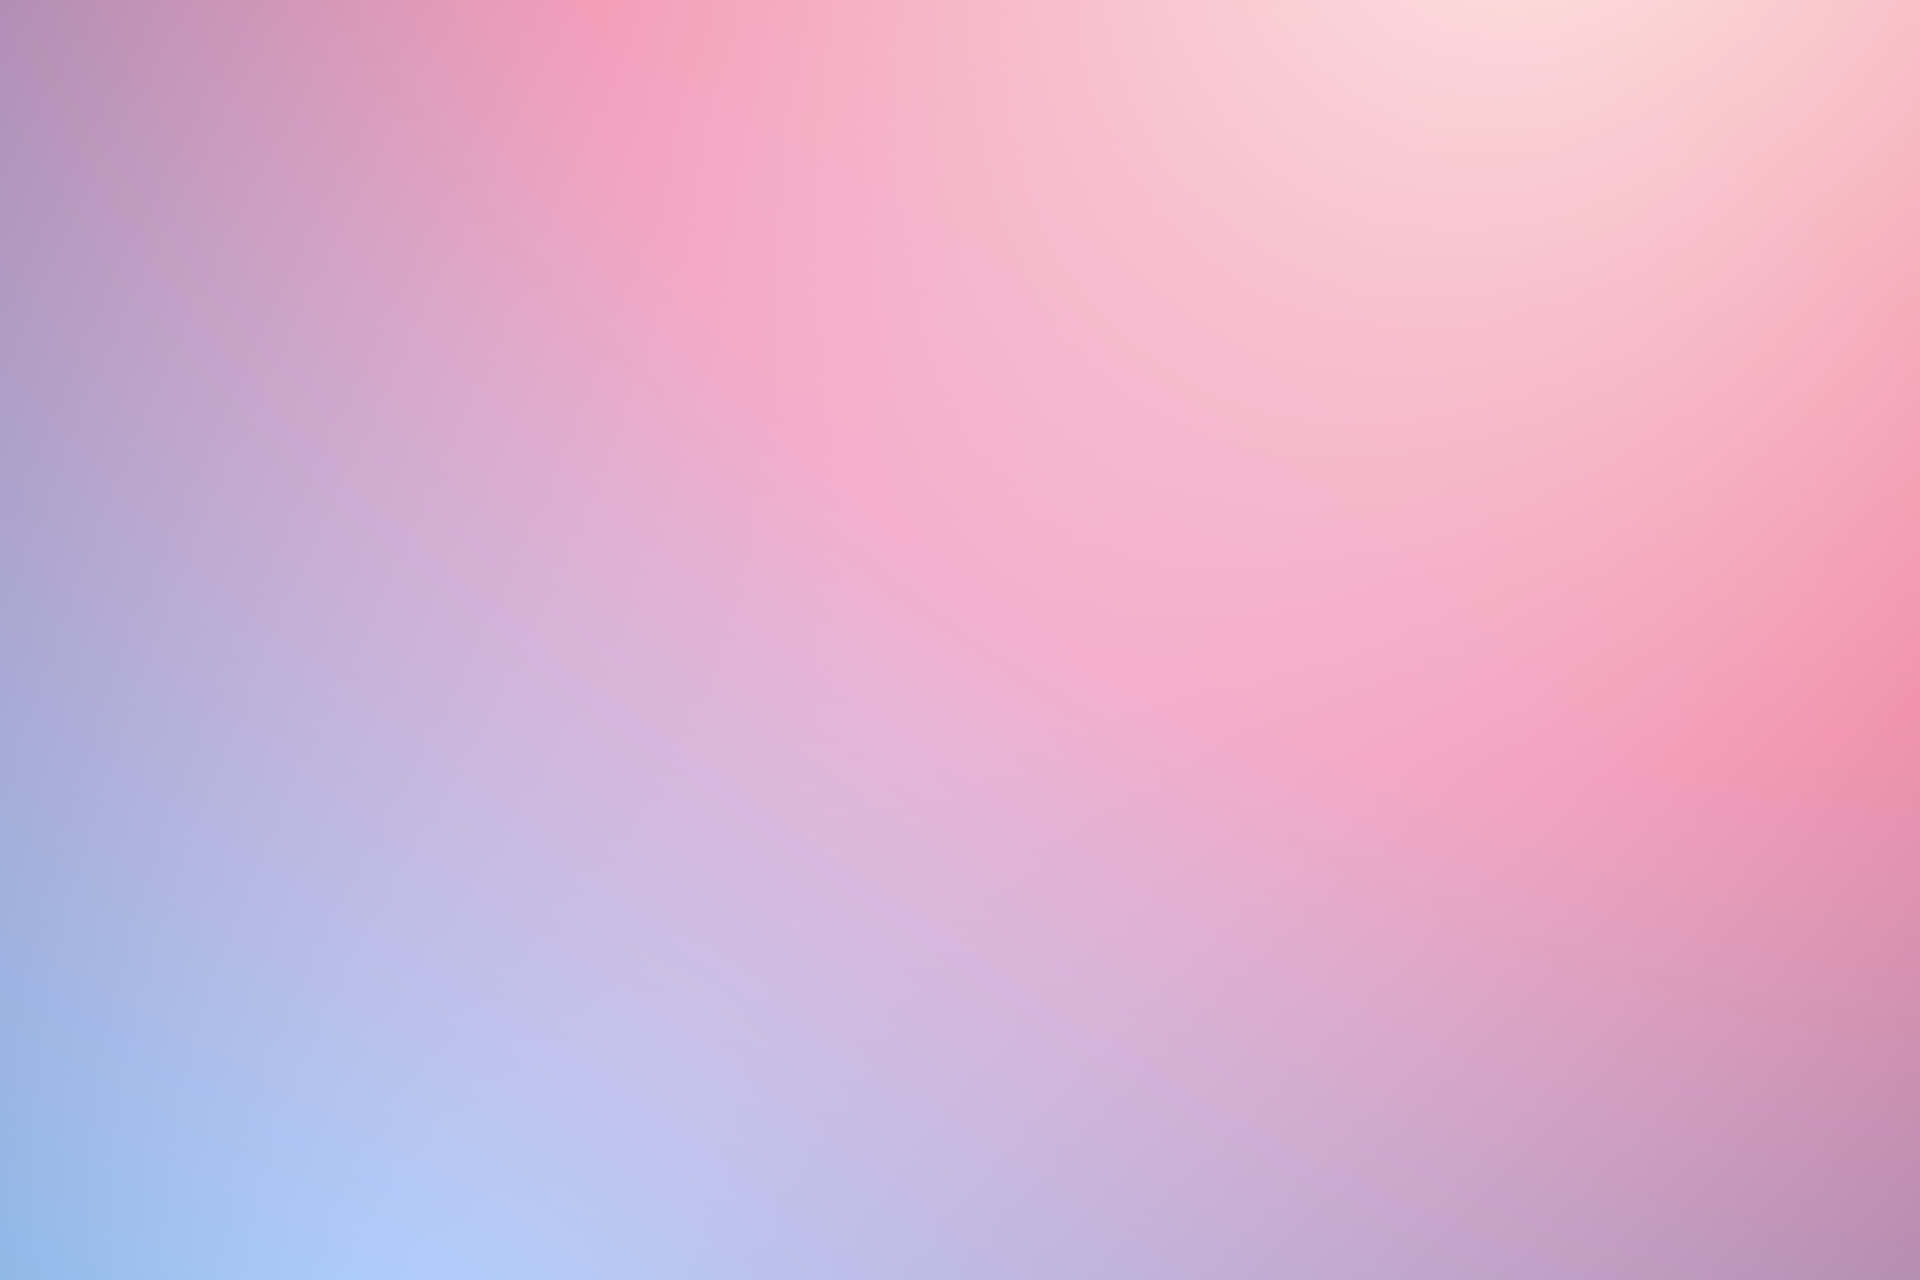 Delightful Pastel Ombre Abstract For Gradient Background